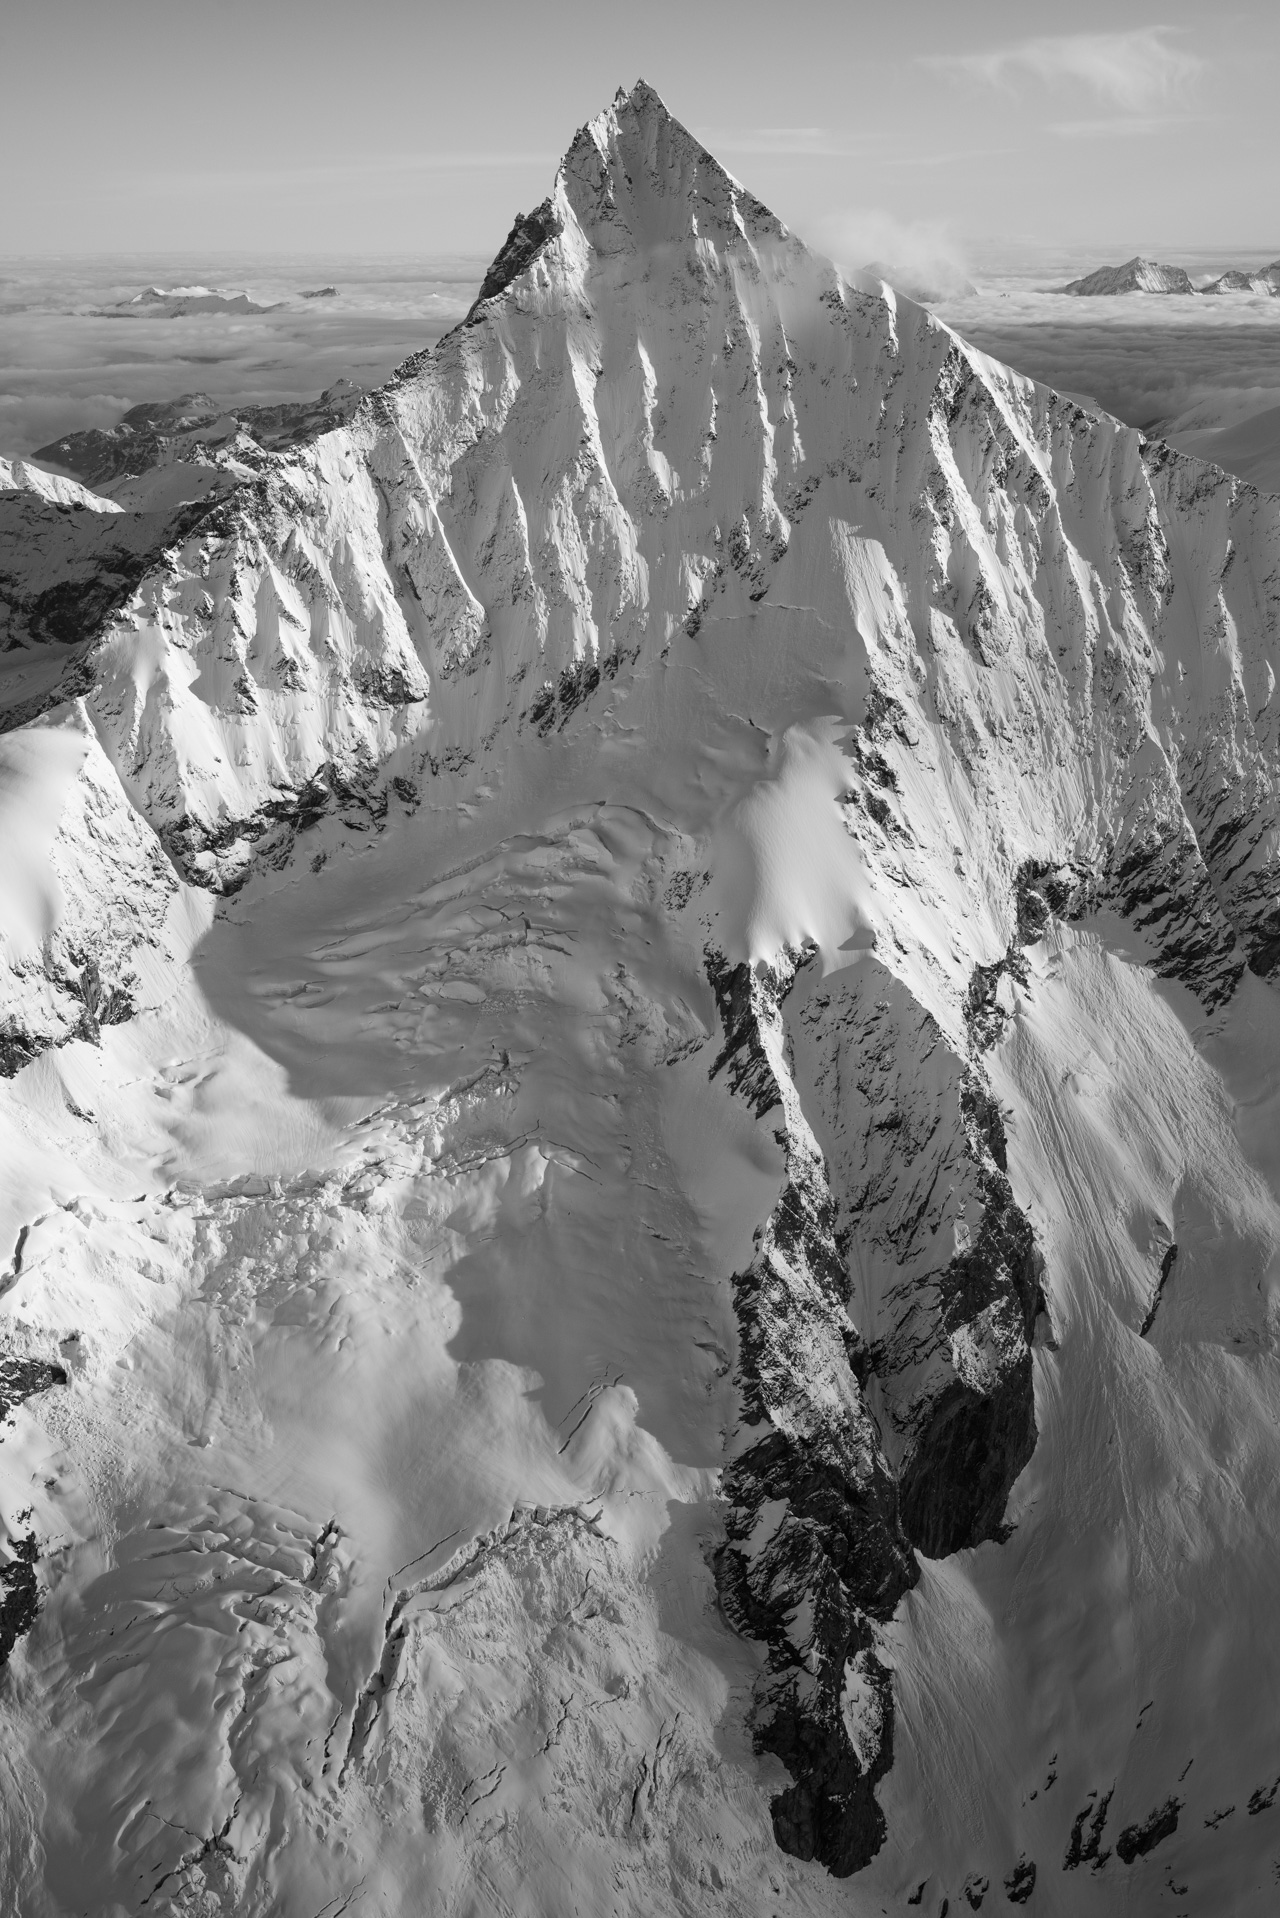 The Valais Alps and the Weisshorn - Swiss Alps in black and white picture